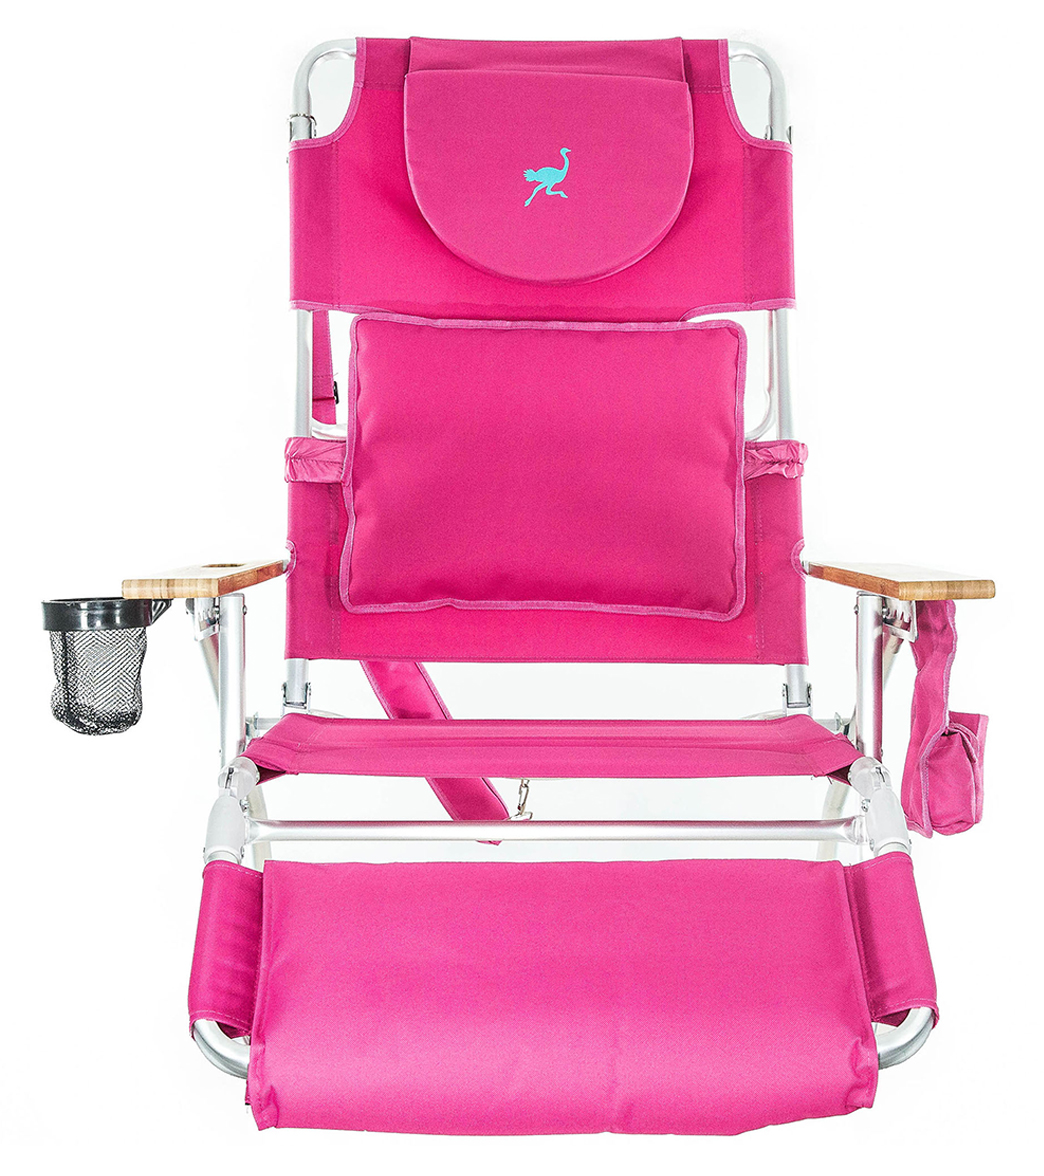 Ostrich Deluxe Beach Chair at SwimOutlet.com - Free Shipping